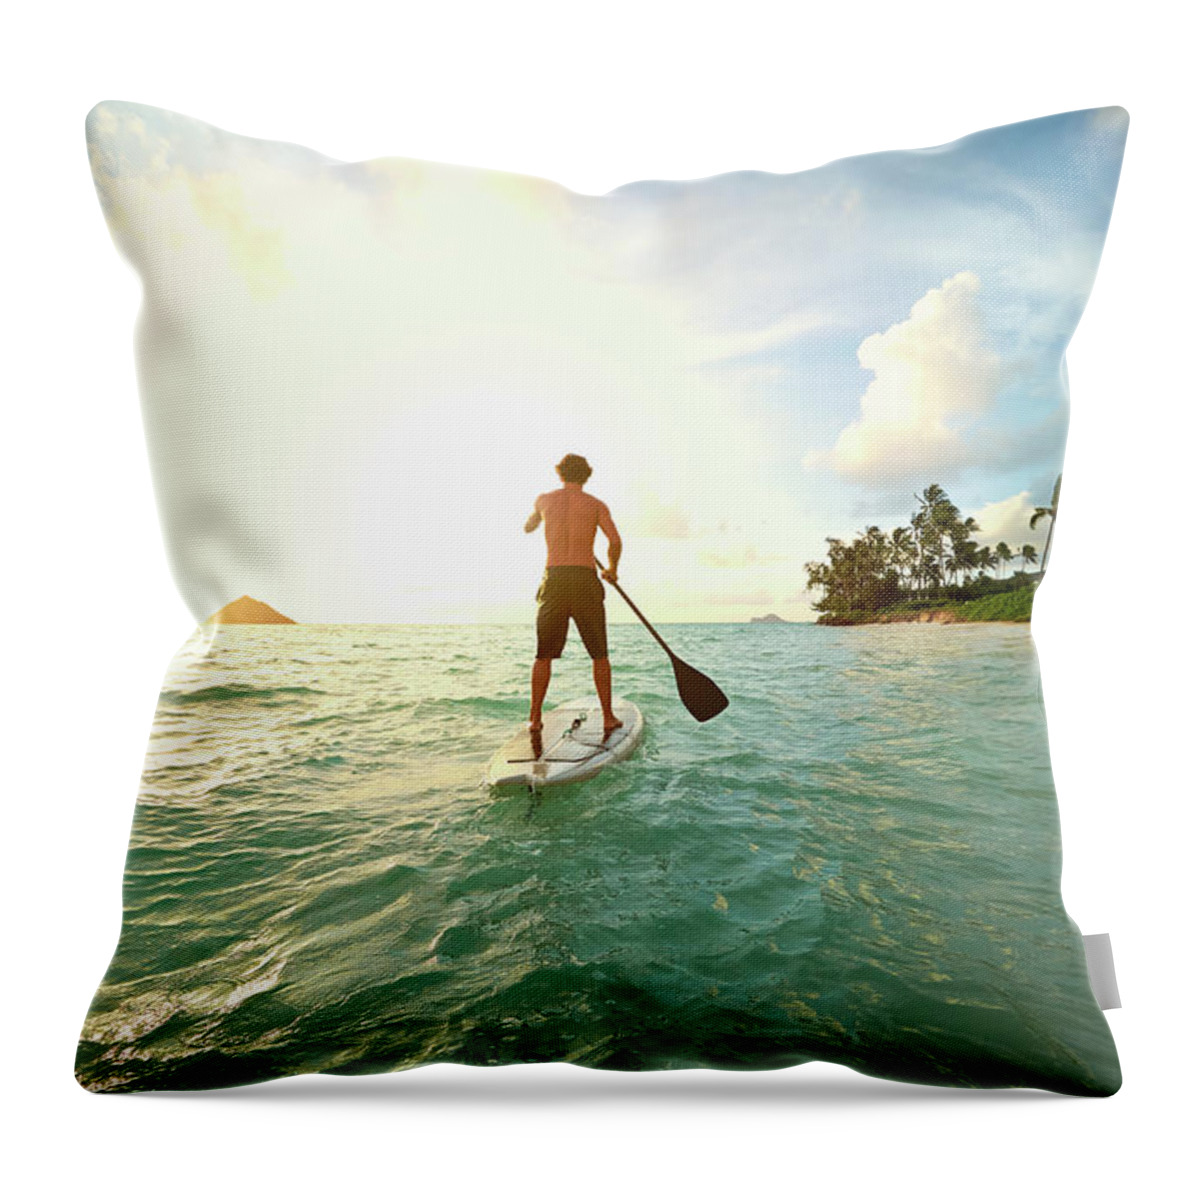 Tranquility Throw Pillow featuring the photograph Caucasian Man On Paddle Board In Ocean #2 by Colin Anderson Productions Pty Ltd